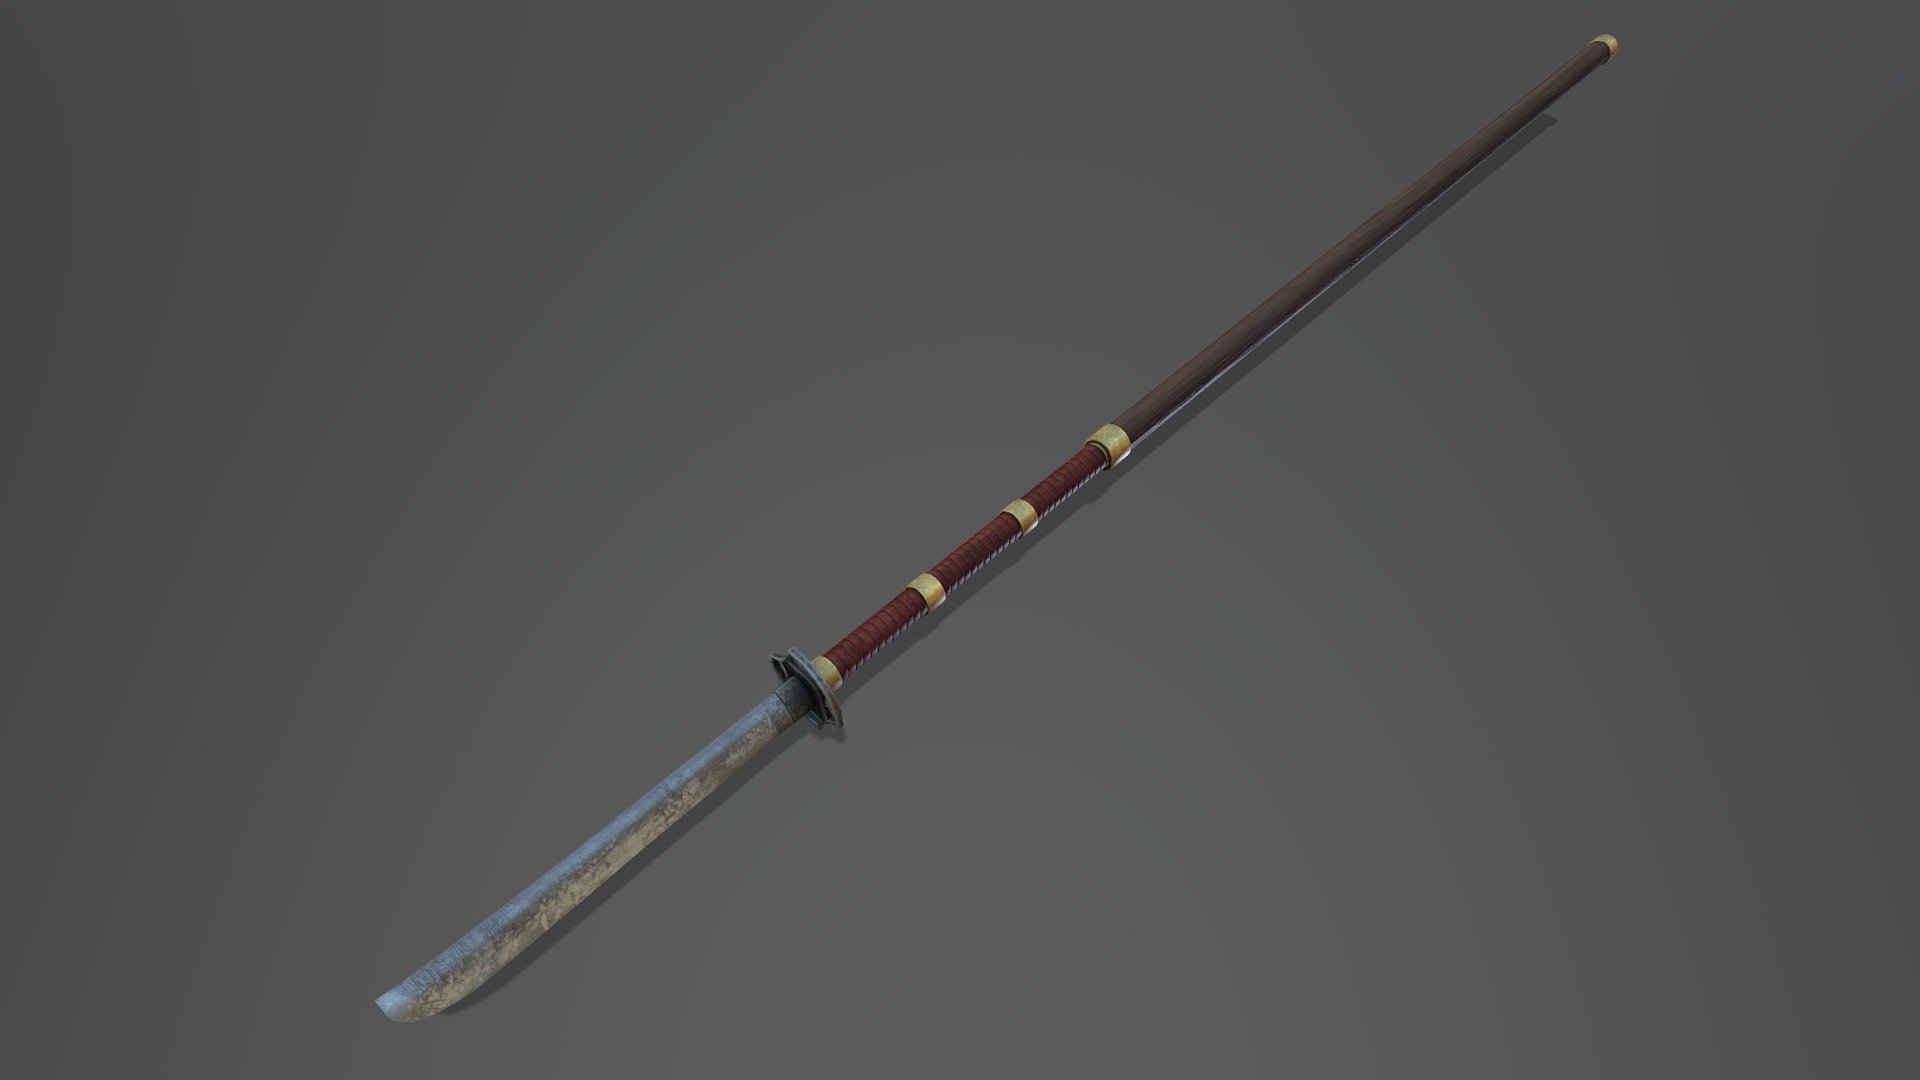 A low poly Naginata. It was originally designed for Second Life where can be purchased to this day. You can find an access link here:


https://marketplace.secondlife.com/p/Edo-World-Naginata-v2/20745012



!Notice!


Unfortunately my affiliation with that store has since ceased and this product will receive no more updates 3d model